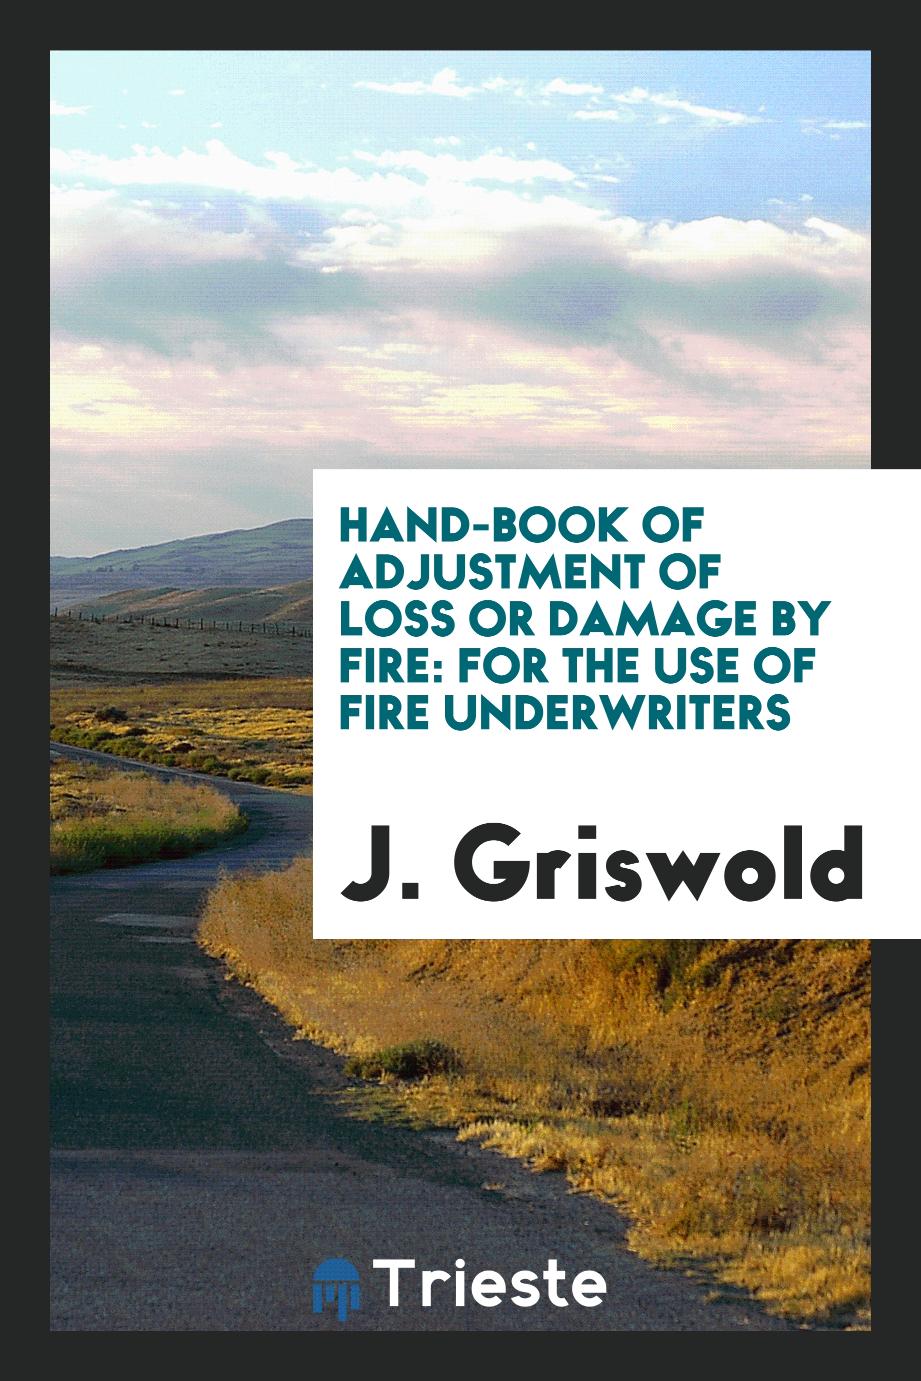 Hand-book of Adjustment of Loss Or Damage by Fire: For the Use of Fire Underwriters